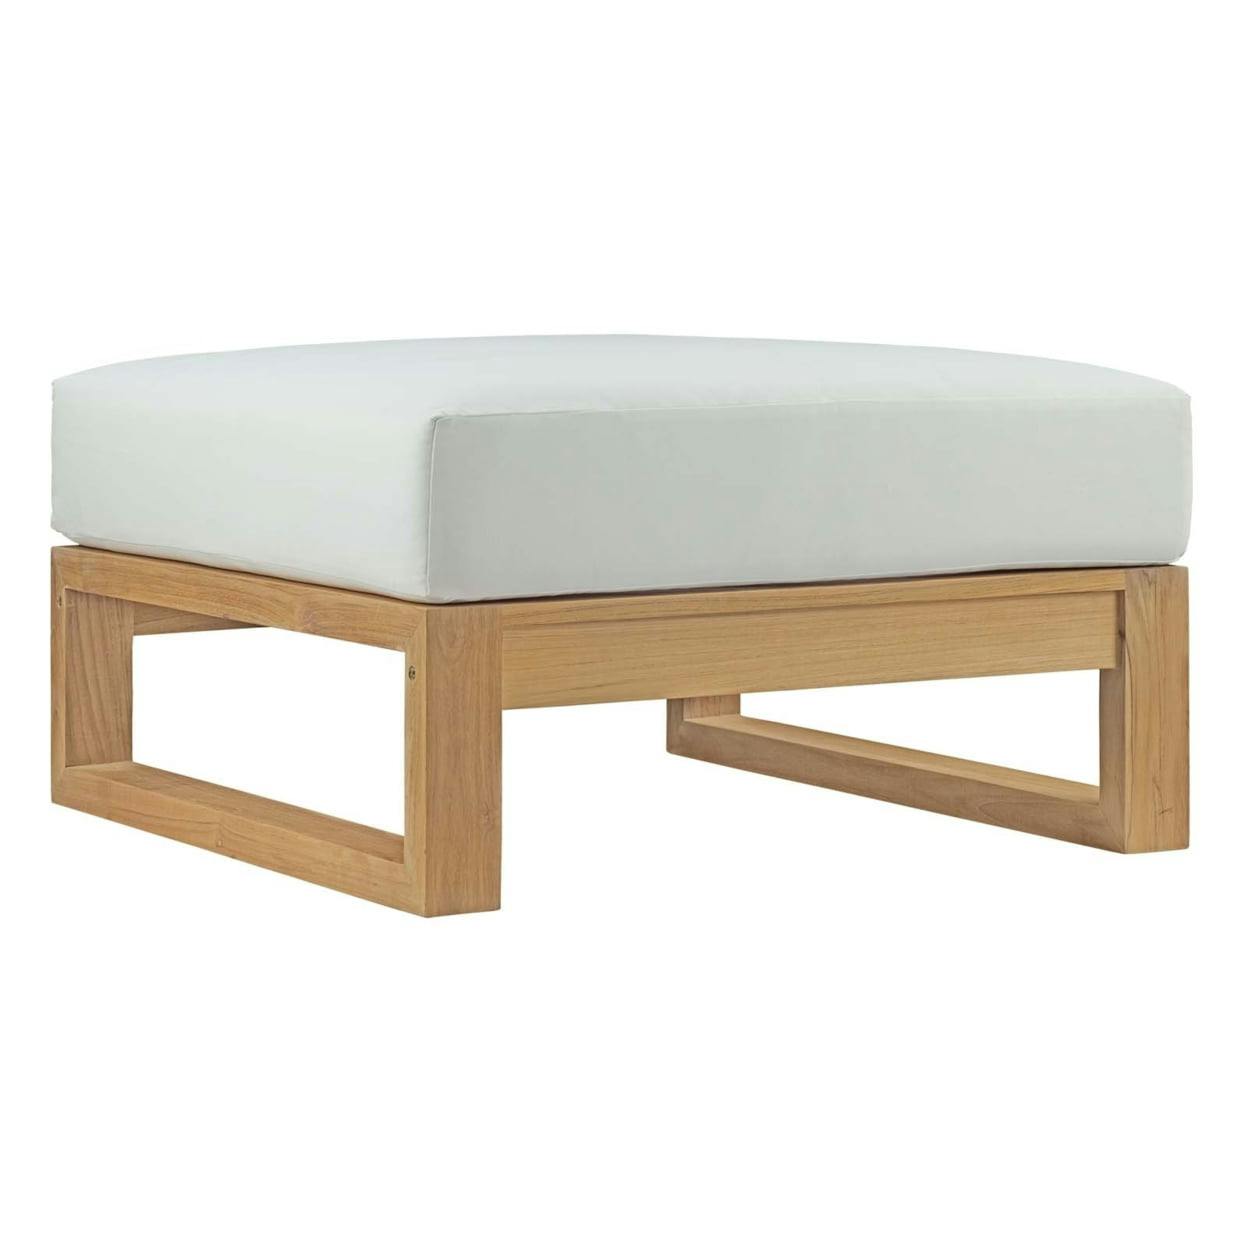 Upland Teak Wood Patio Ottoman in Natural White